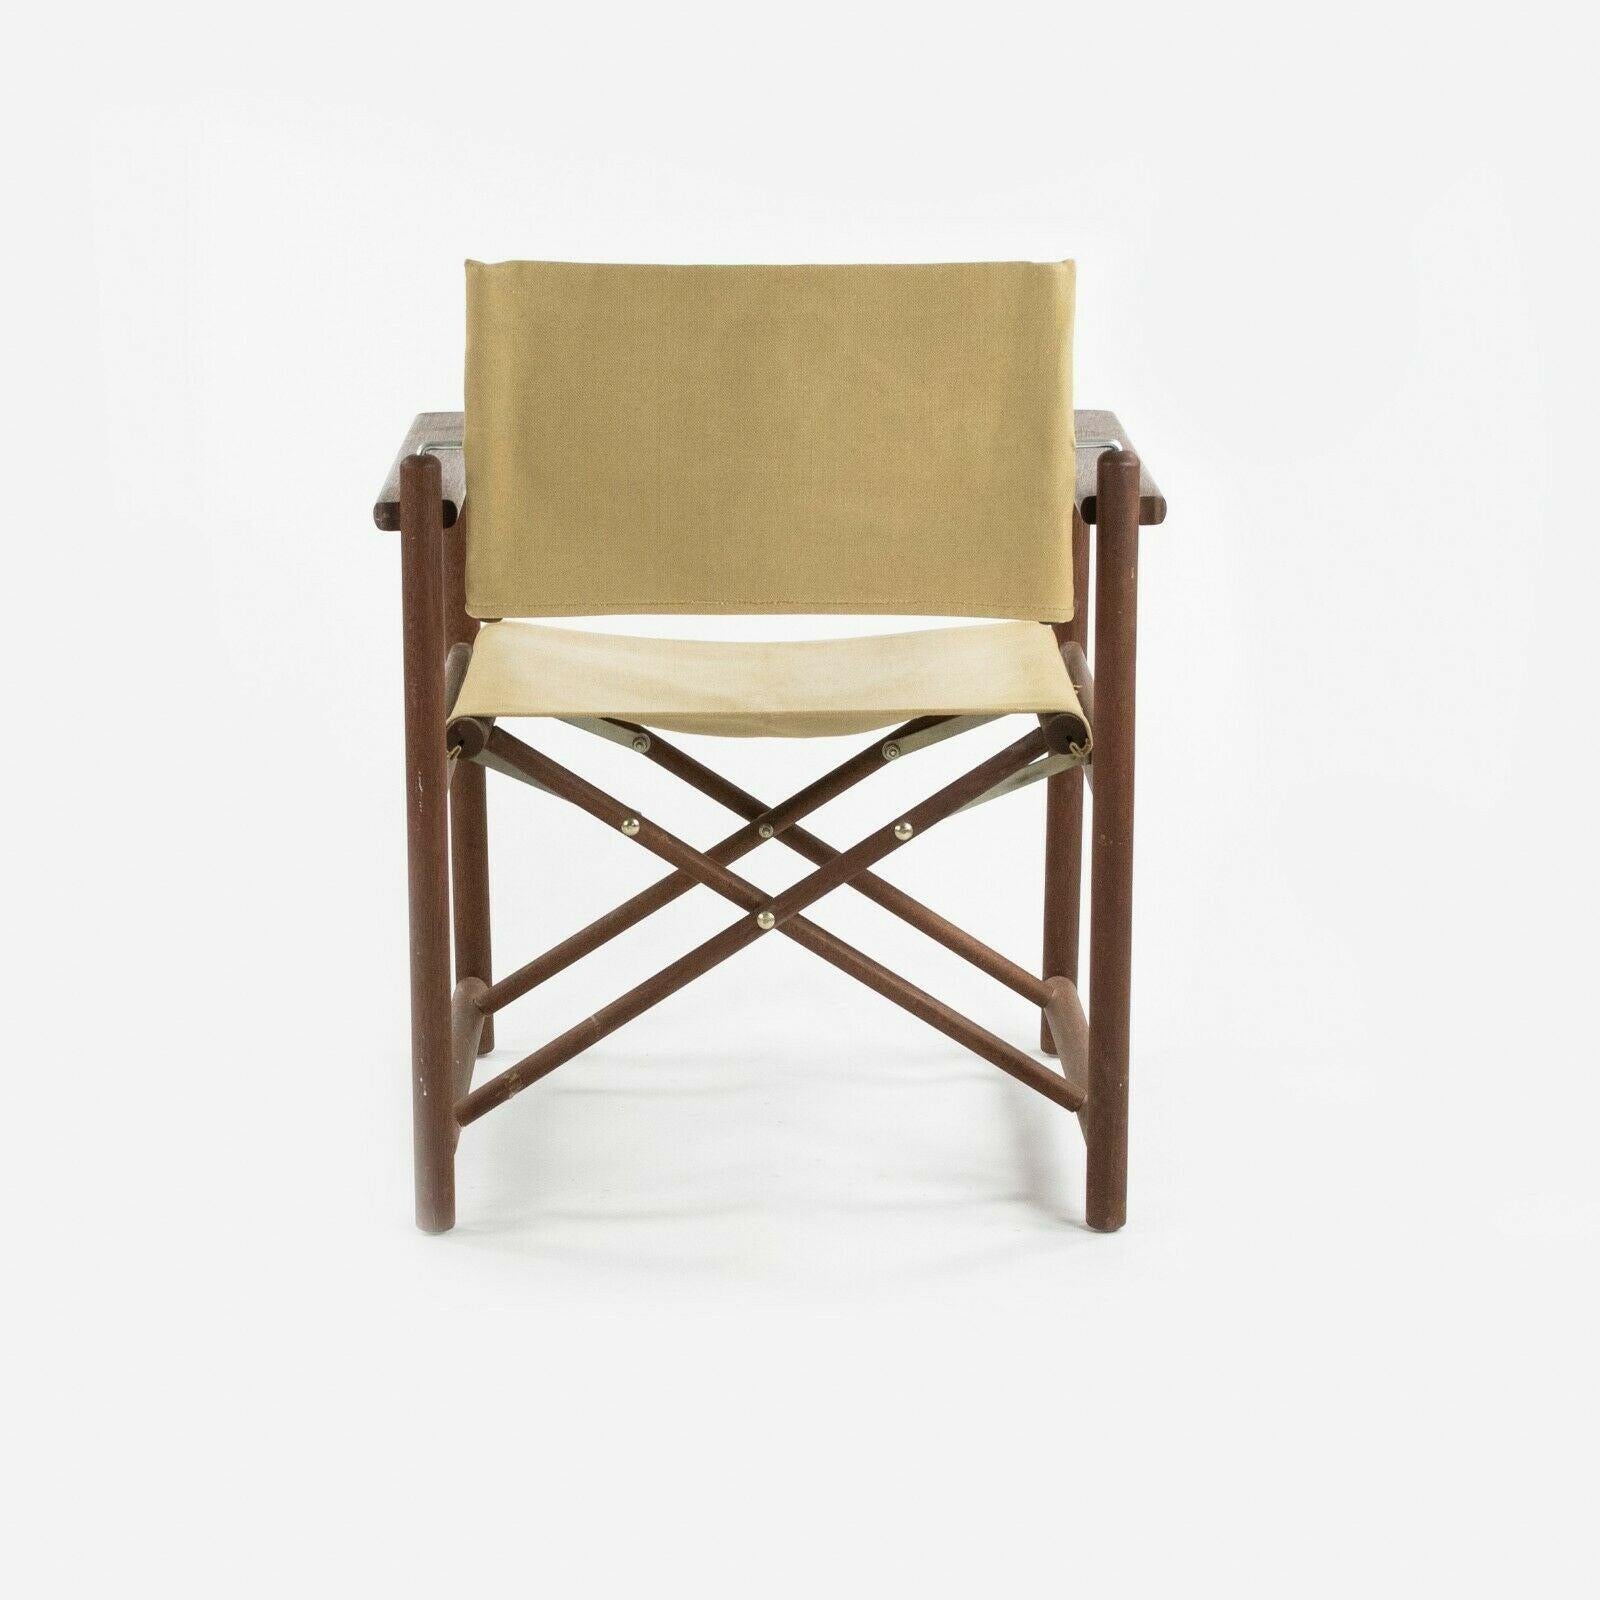 1960s Danish Modern Walnut and Canvas Folding Campaign Chair For Sale 4